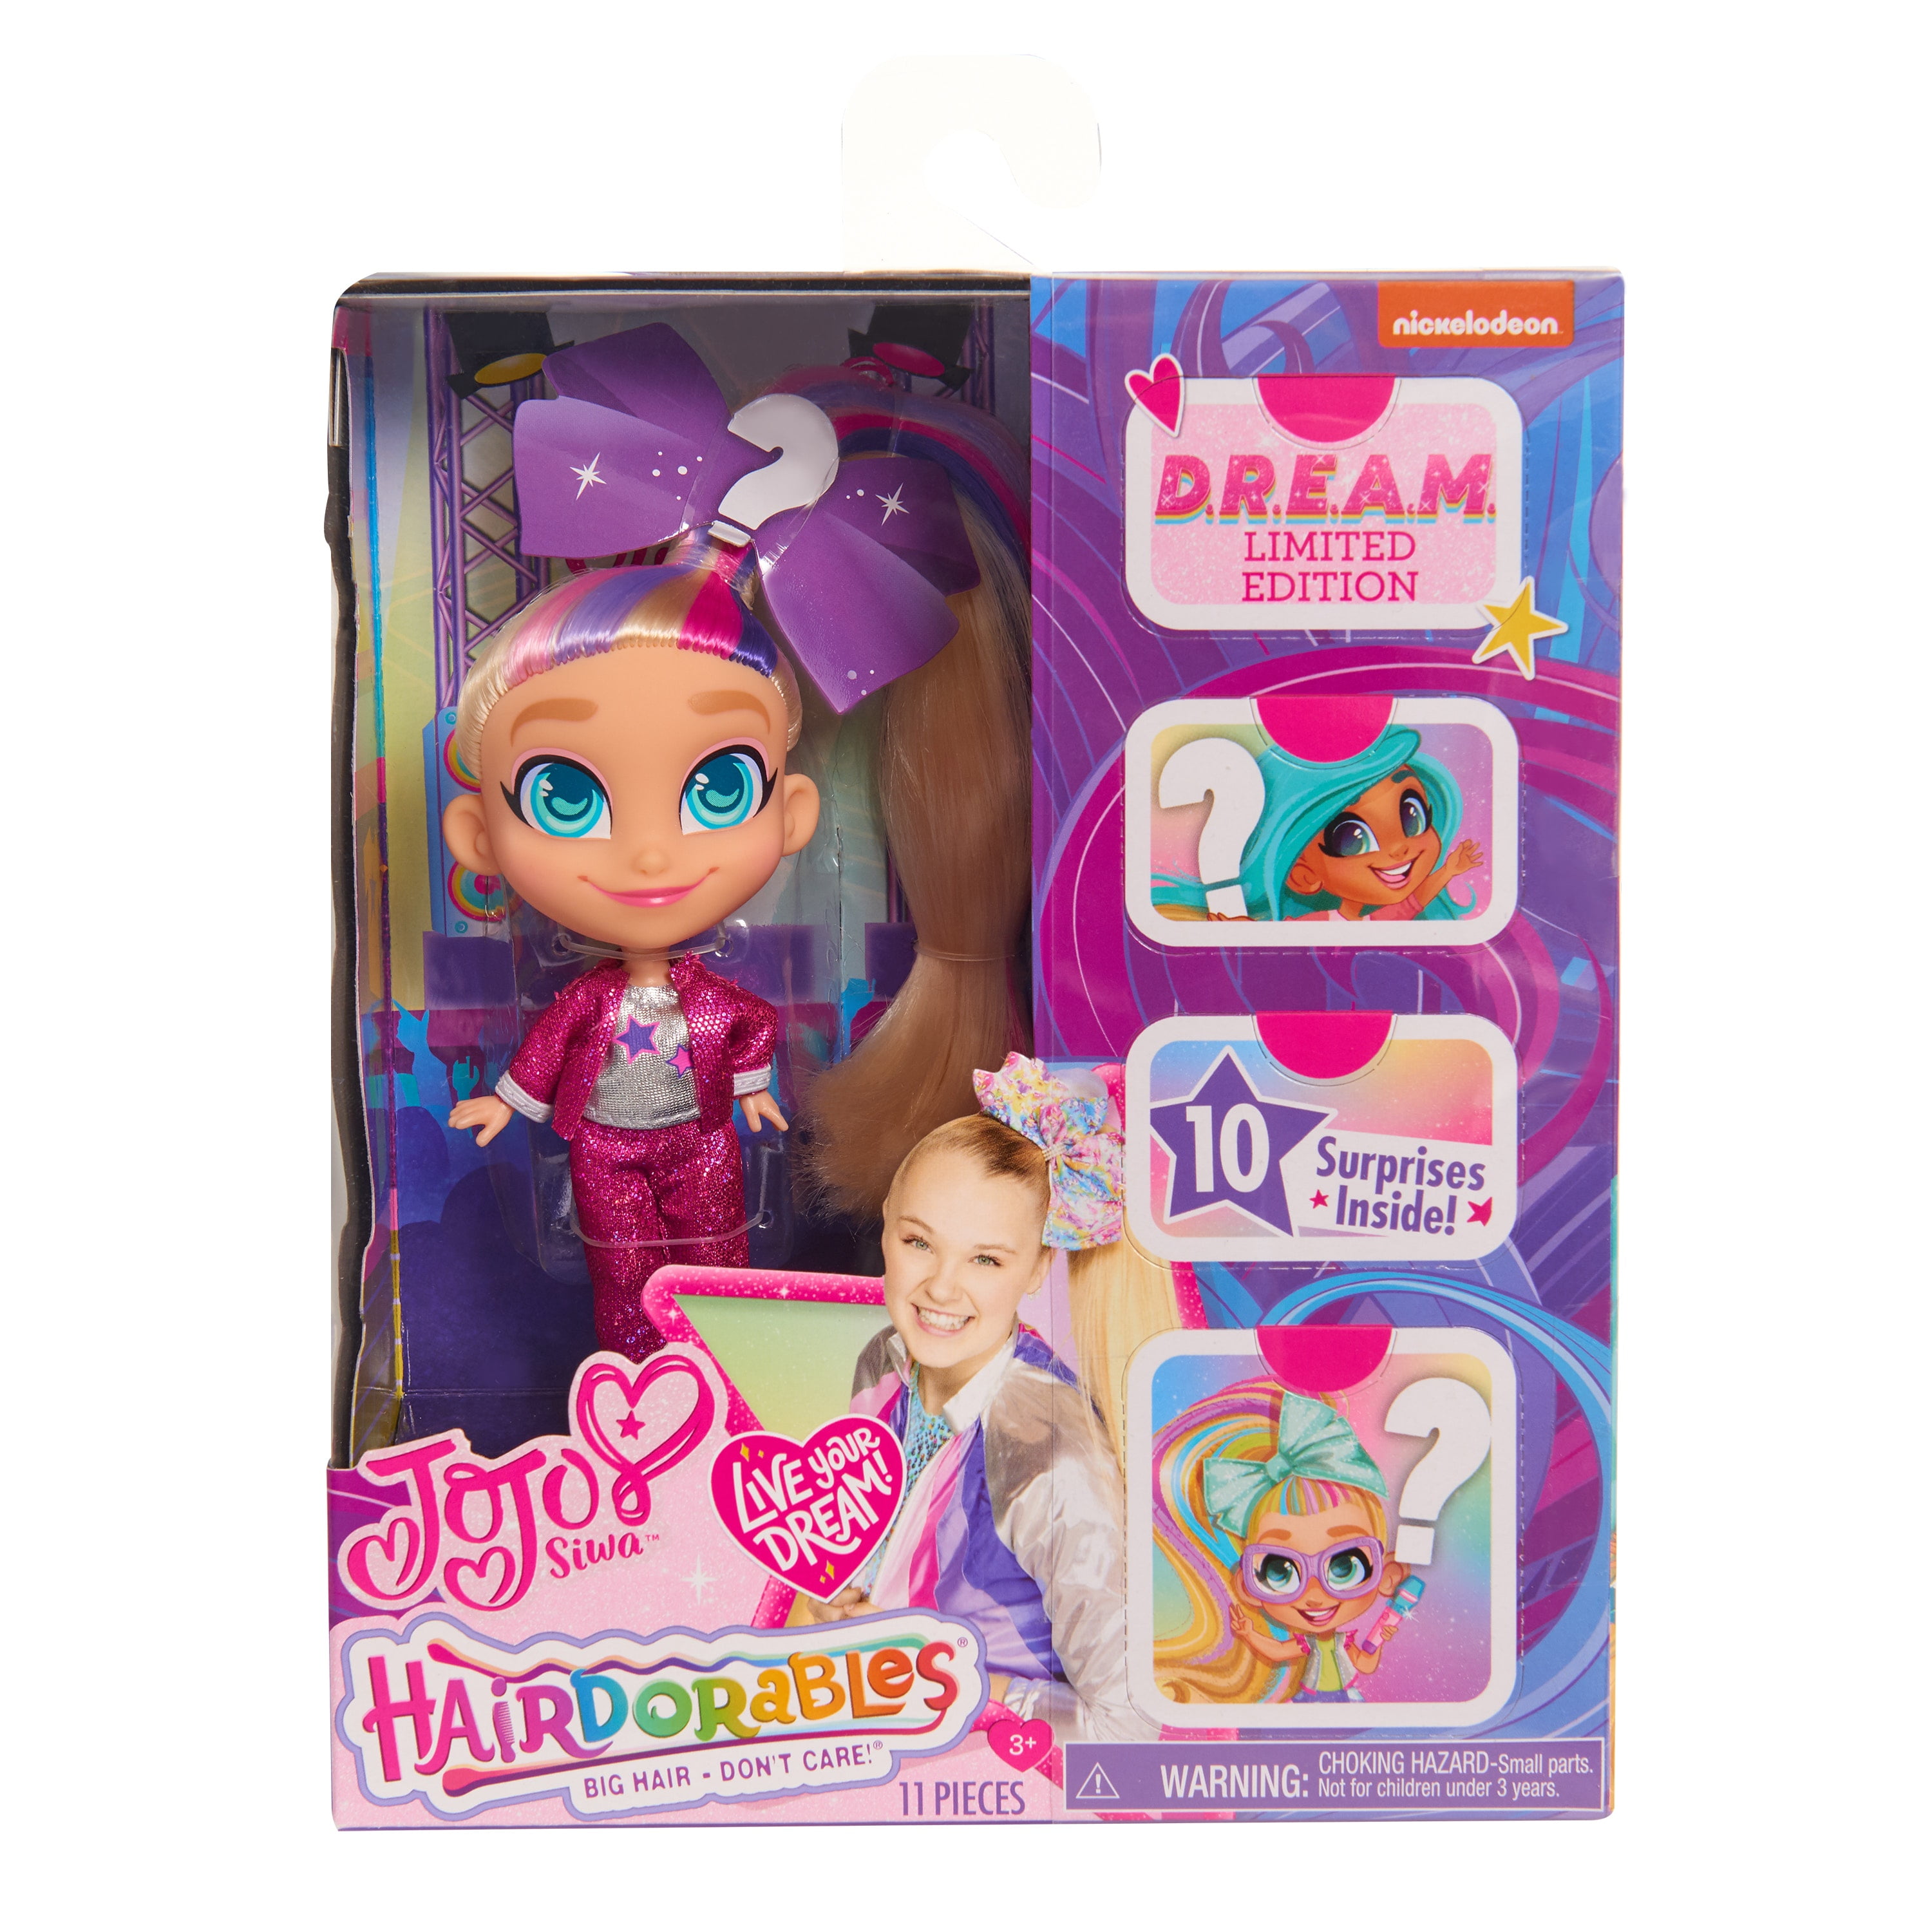 Doll Style B 10 Surprises New Hairdorables JoJo Siwa Limited Edition D.R.E.A.M 